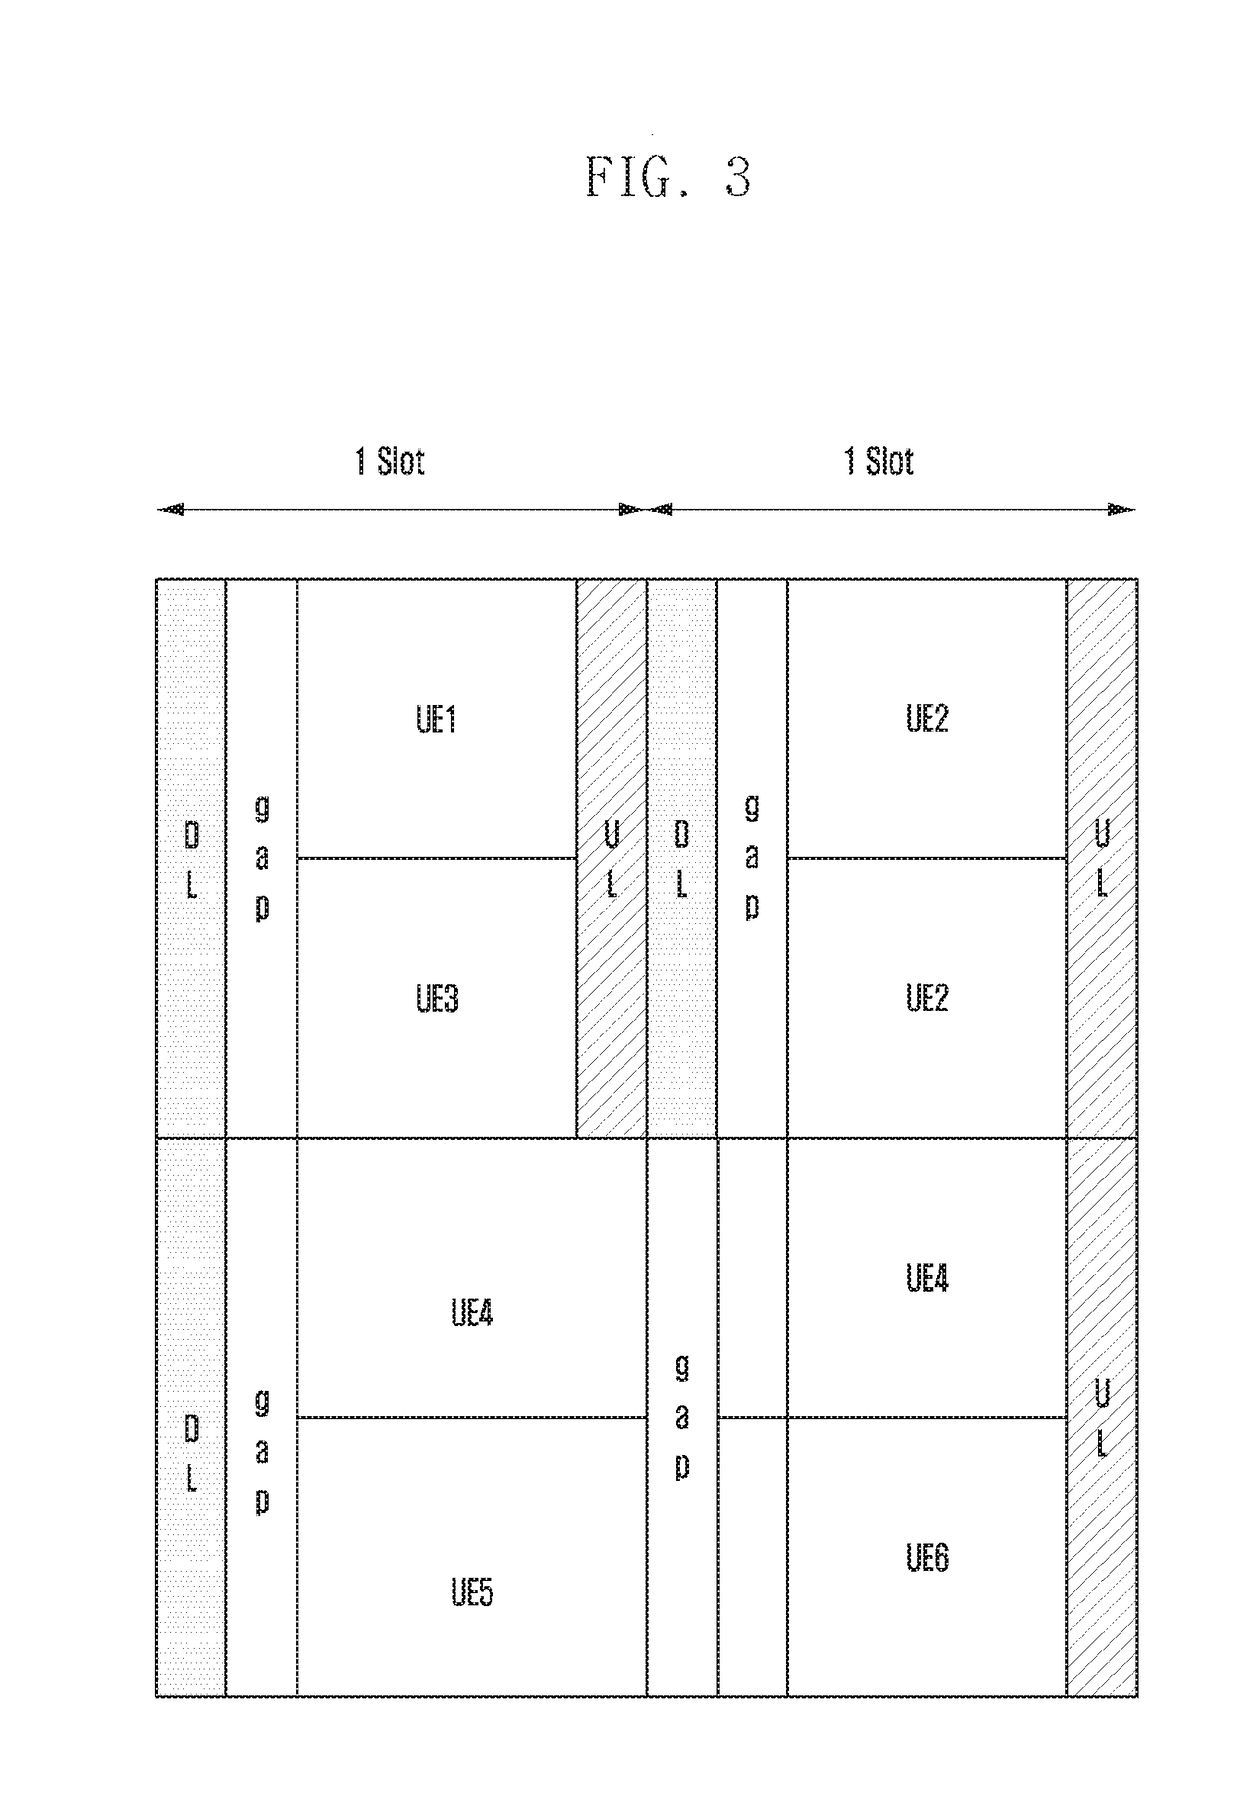 HARQ process management method and apparatus for slot aggregation